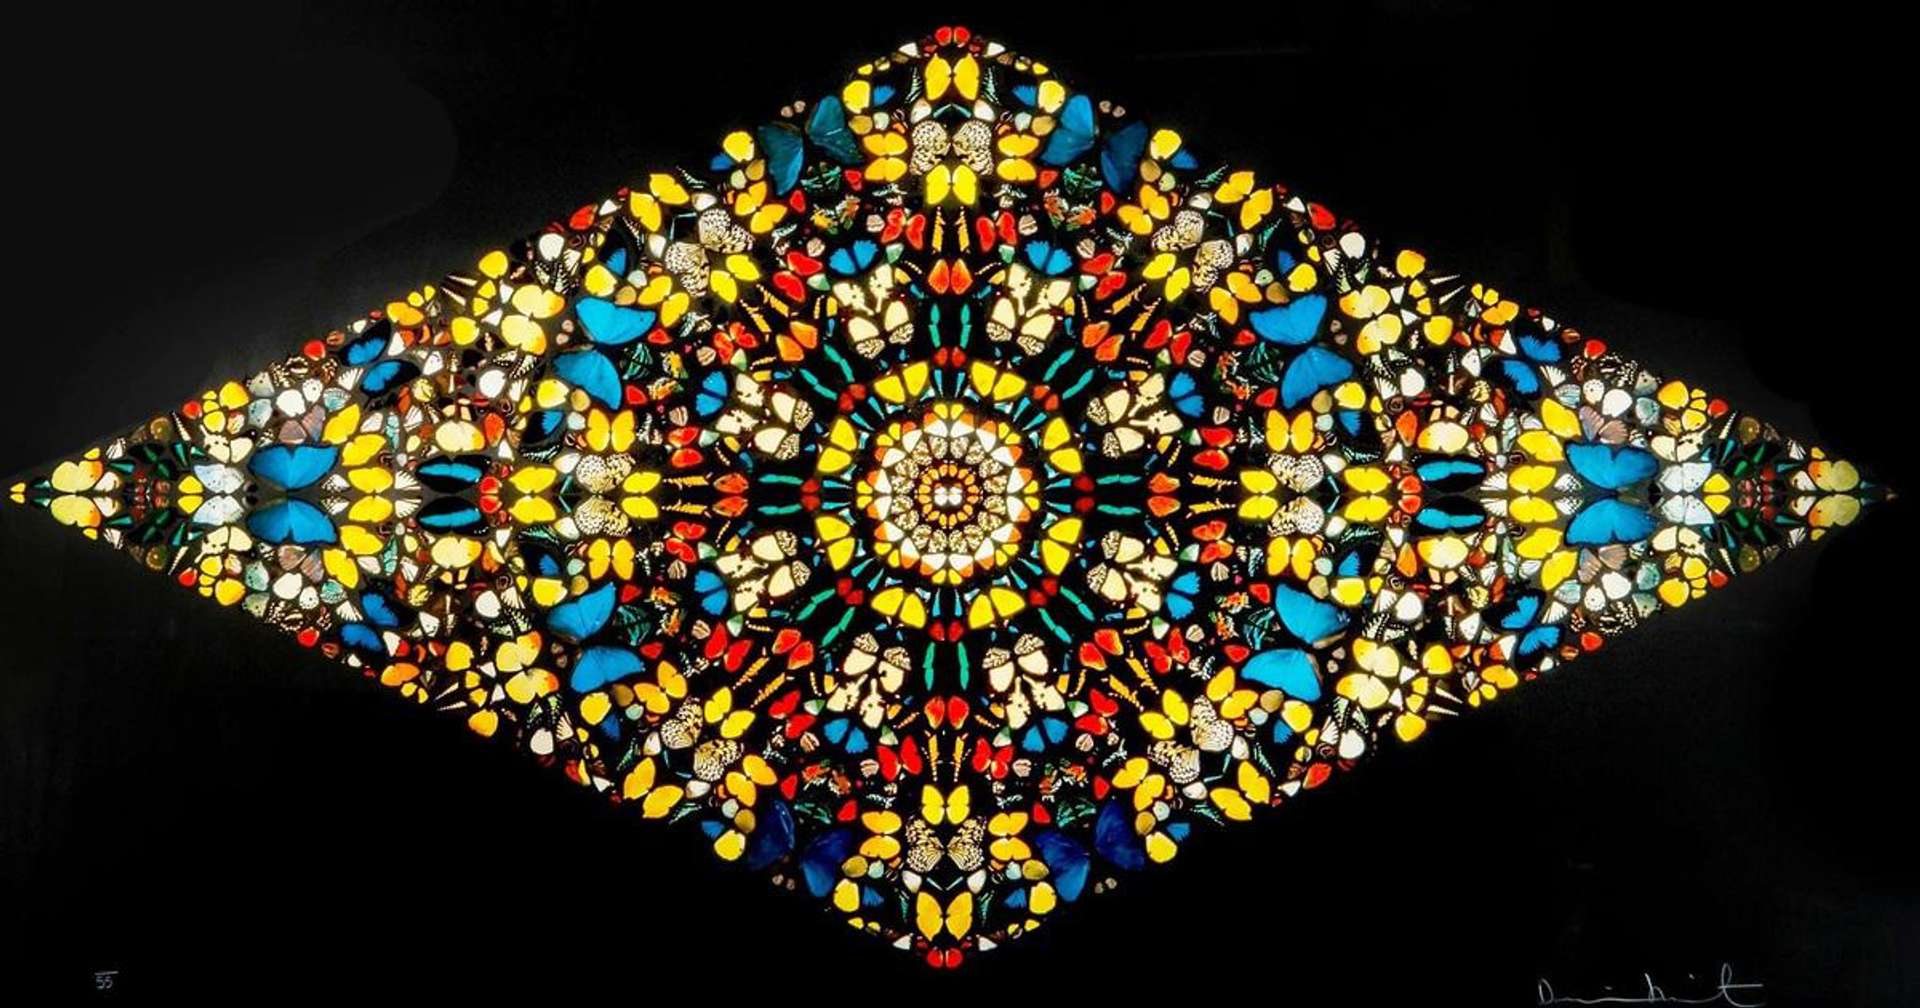 An image of the artwork Faithless by Damien Hirst. It consists of hundreds of colourful butterfly wings, arranged geometrically to create a mandala. The work is lozenge-shaped against a black background.